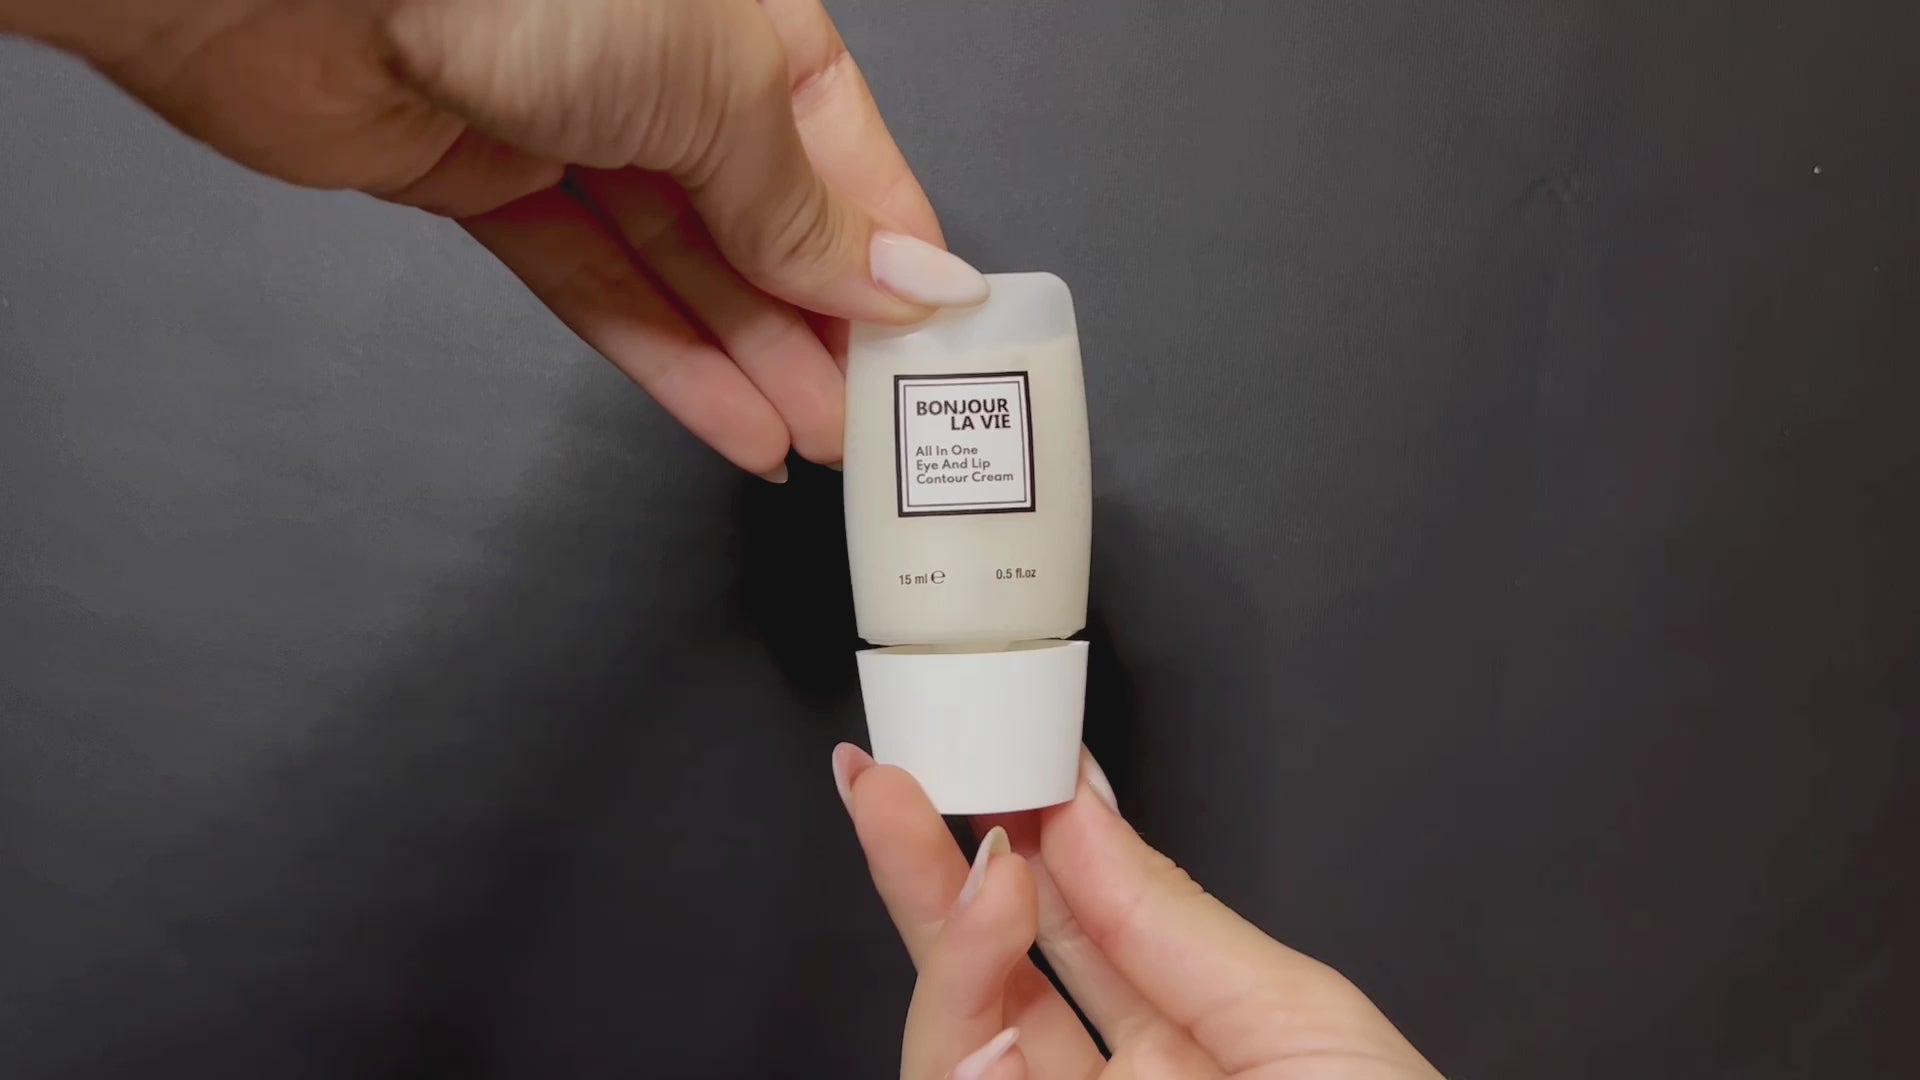 video that shows the texture of the cream - light and absorbs quickly